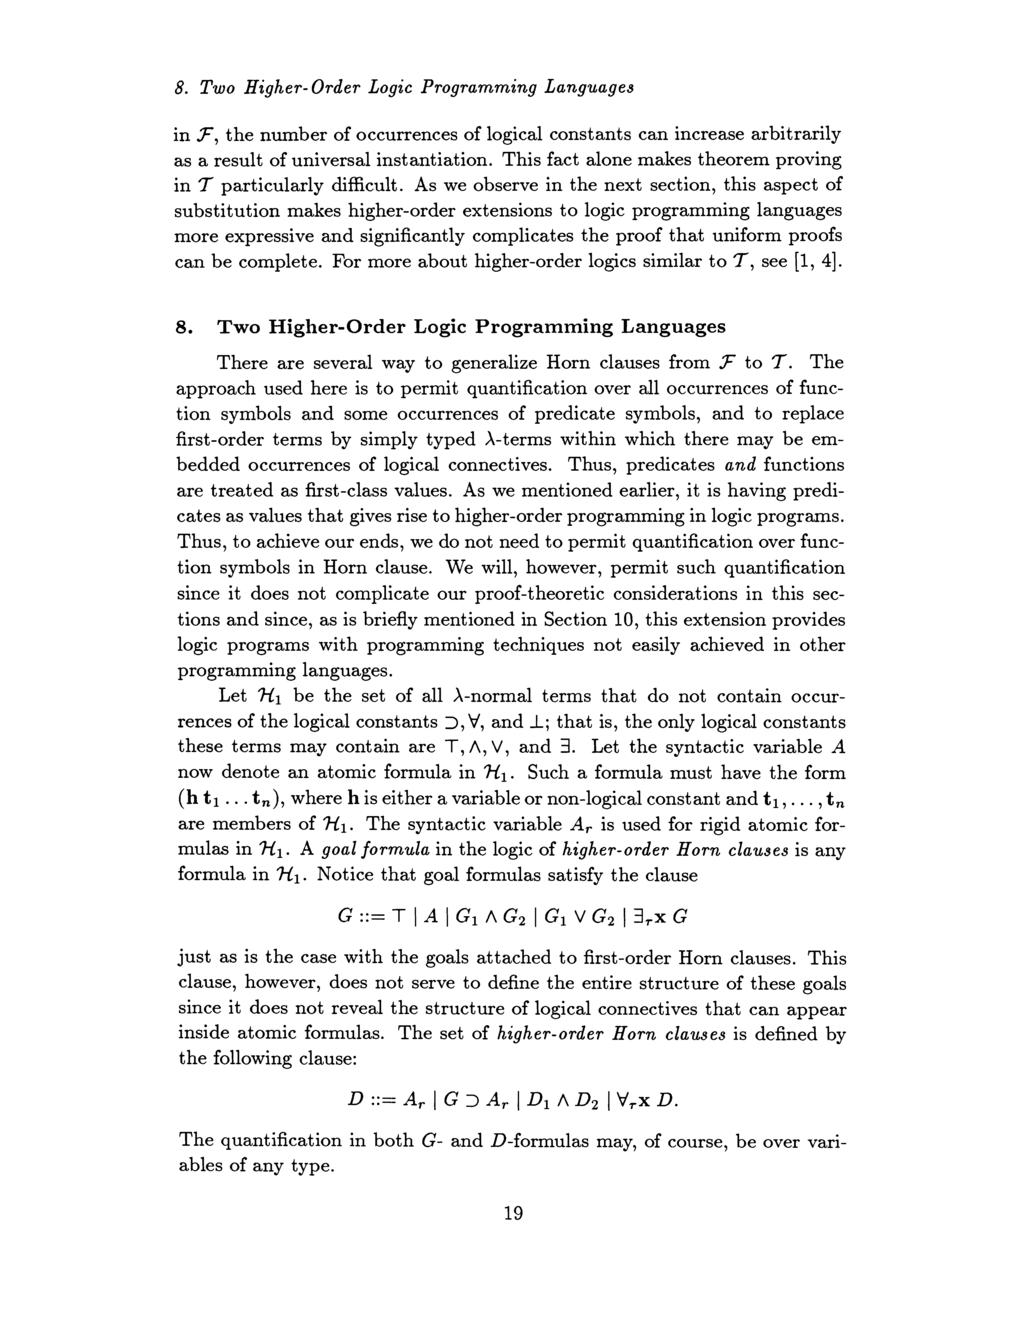 8. Two Higher- Order Logic Programming Languages in 7, the number of occurrences of logical constants can increase arbitrarily as a result of universal instantiation.